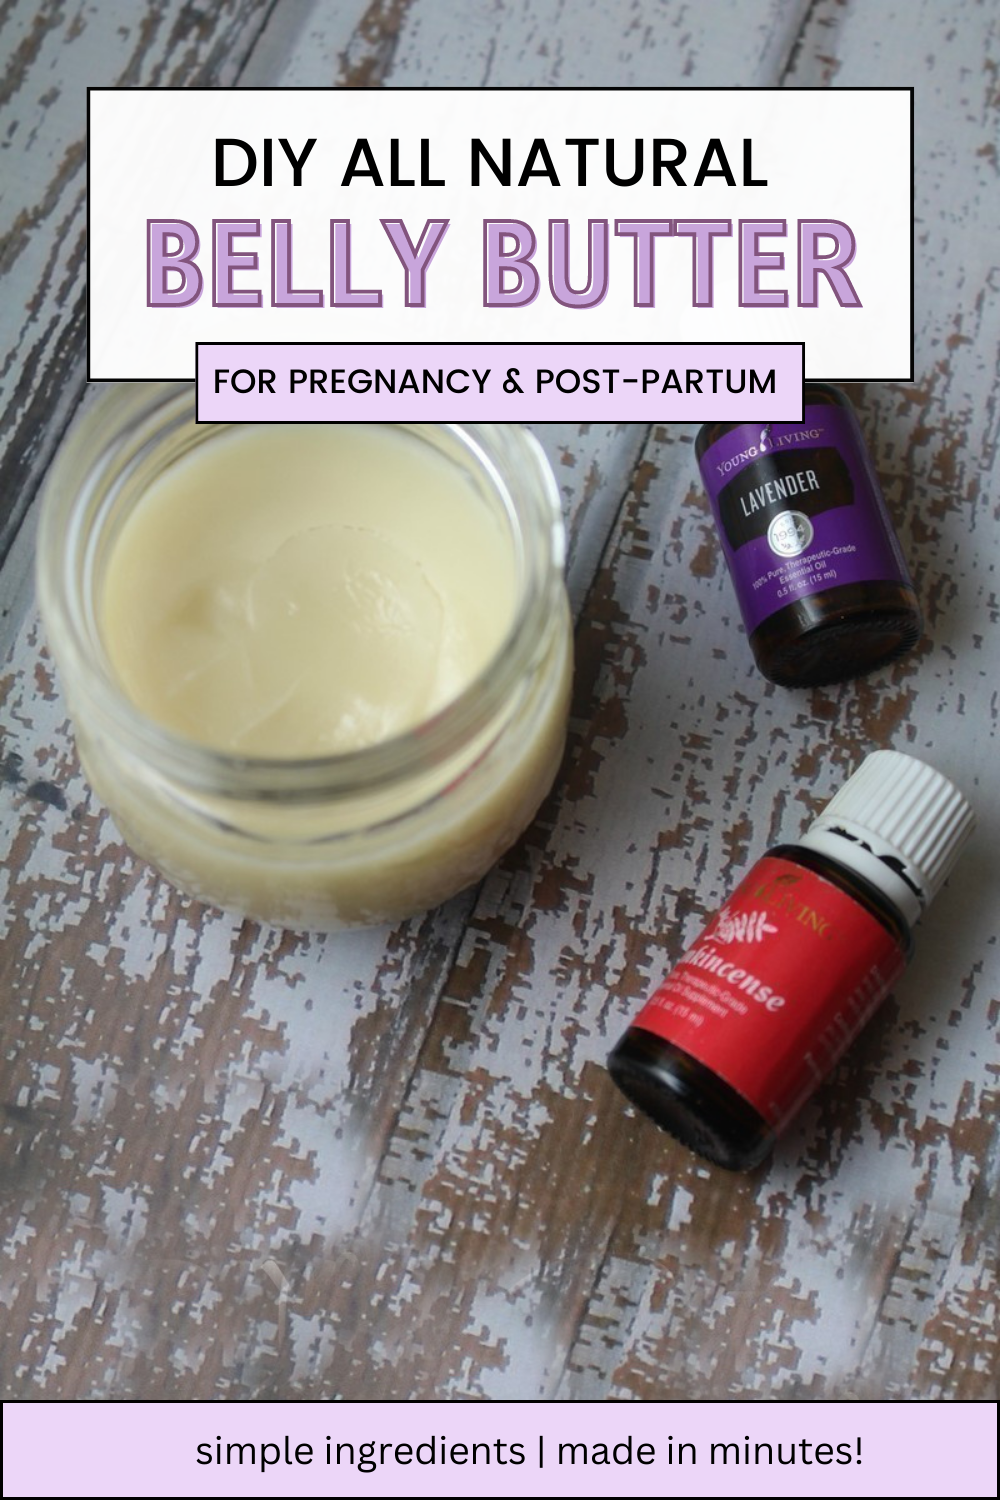 Natural homemade belly butter stirs up in just minutes using simple ingredients that are wonderful for pregnant and postpartum mamas!